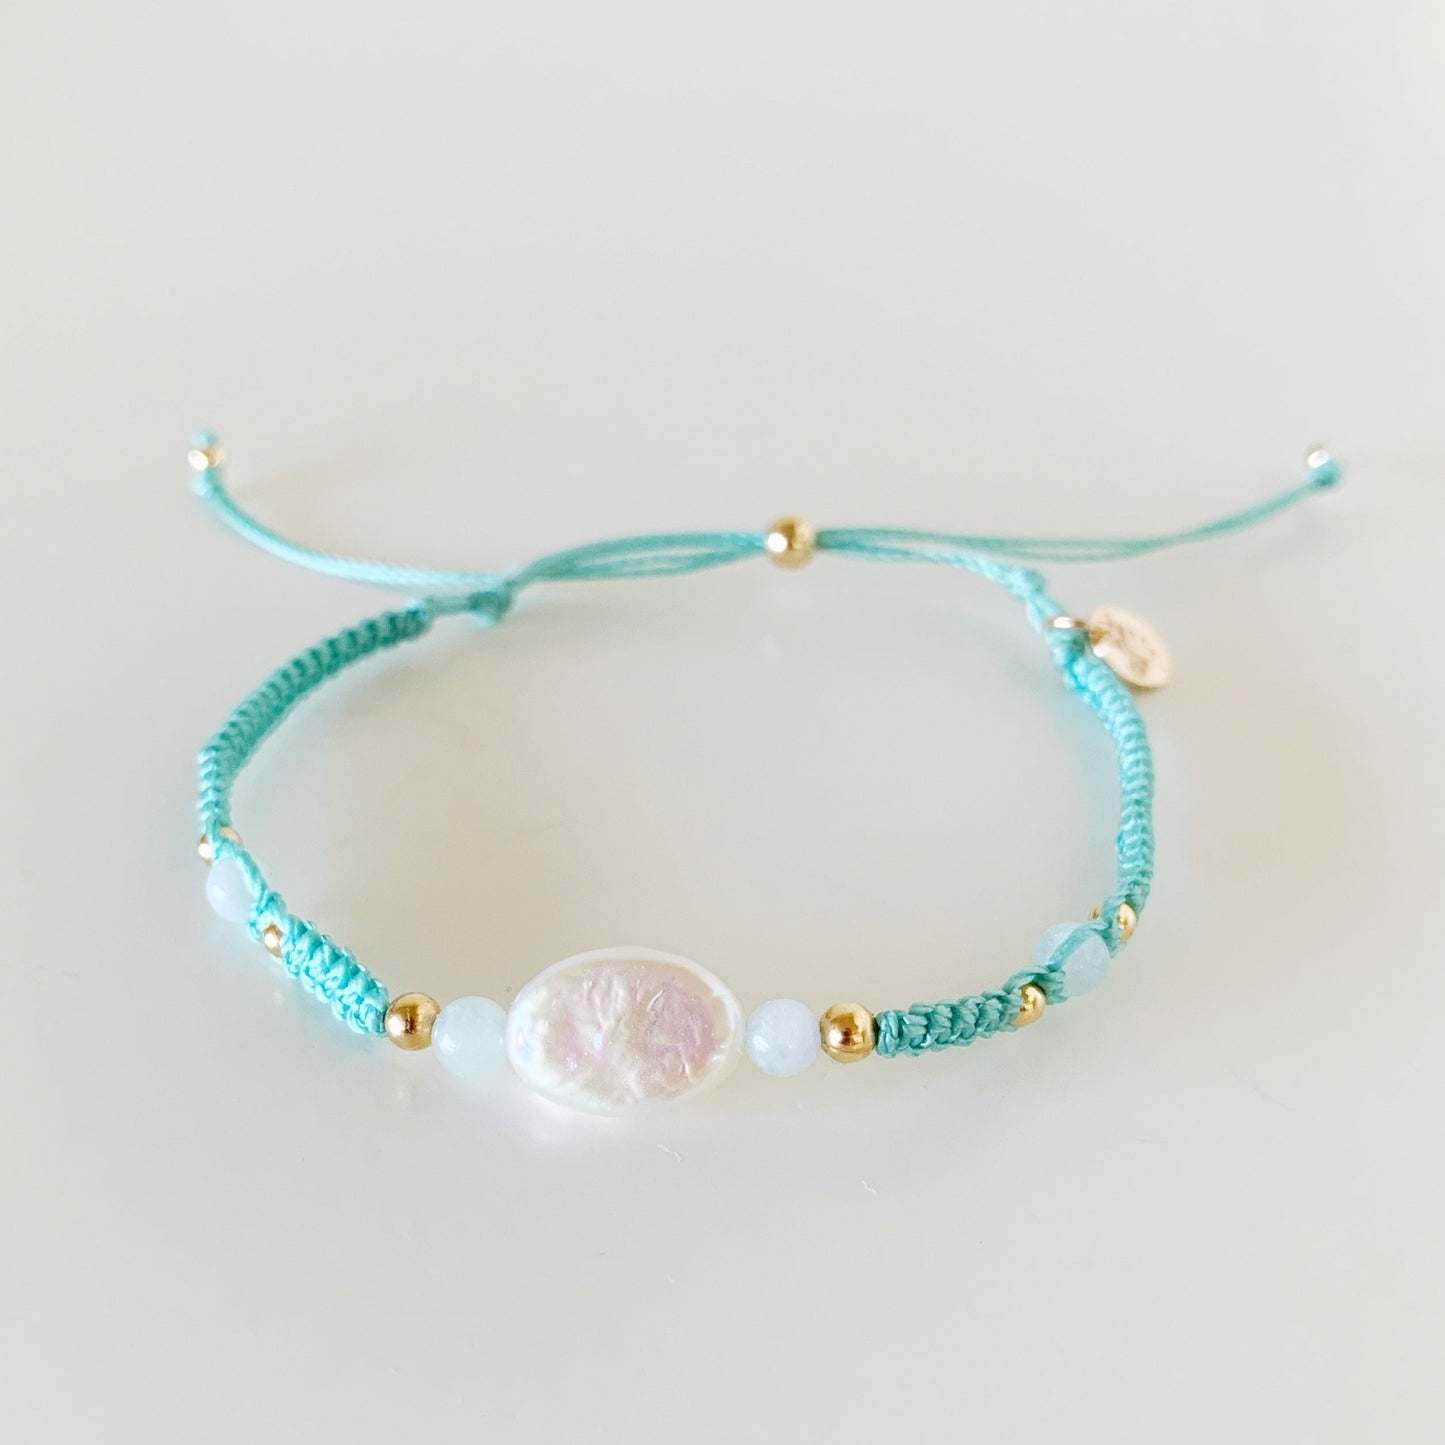 certain urchin is an adjustable macrame bracelet by mermaids and madeleines. its knotted with an icy sage green cord and has an oval shape freshwater pearl at center with 4mm round aqumarine beads on either side. this bracelet is photographed from the front on a white surface